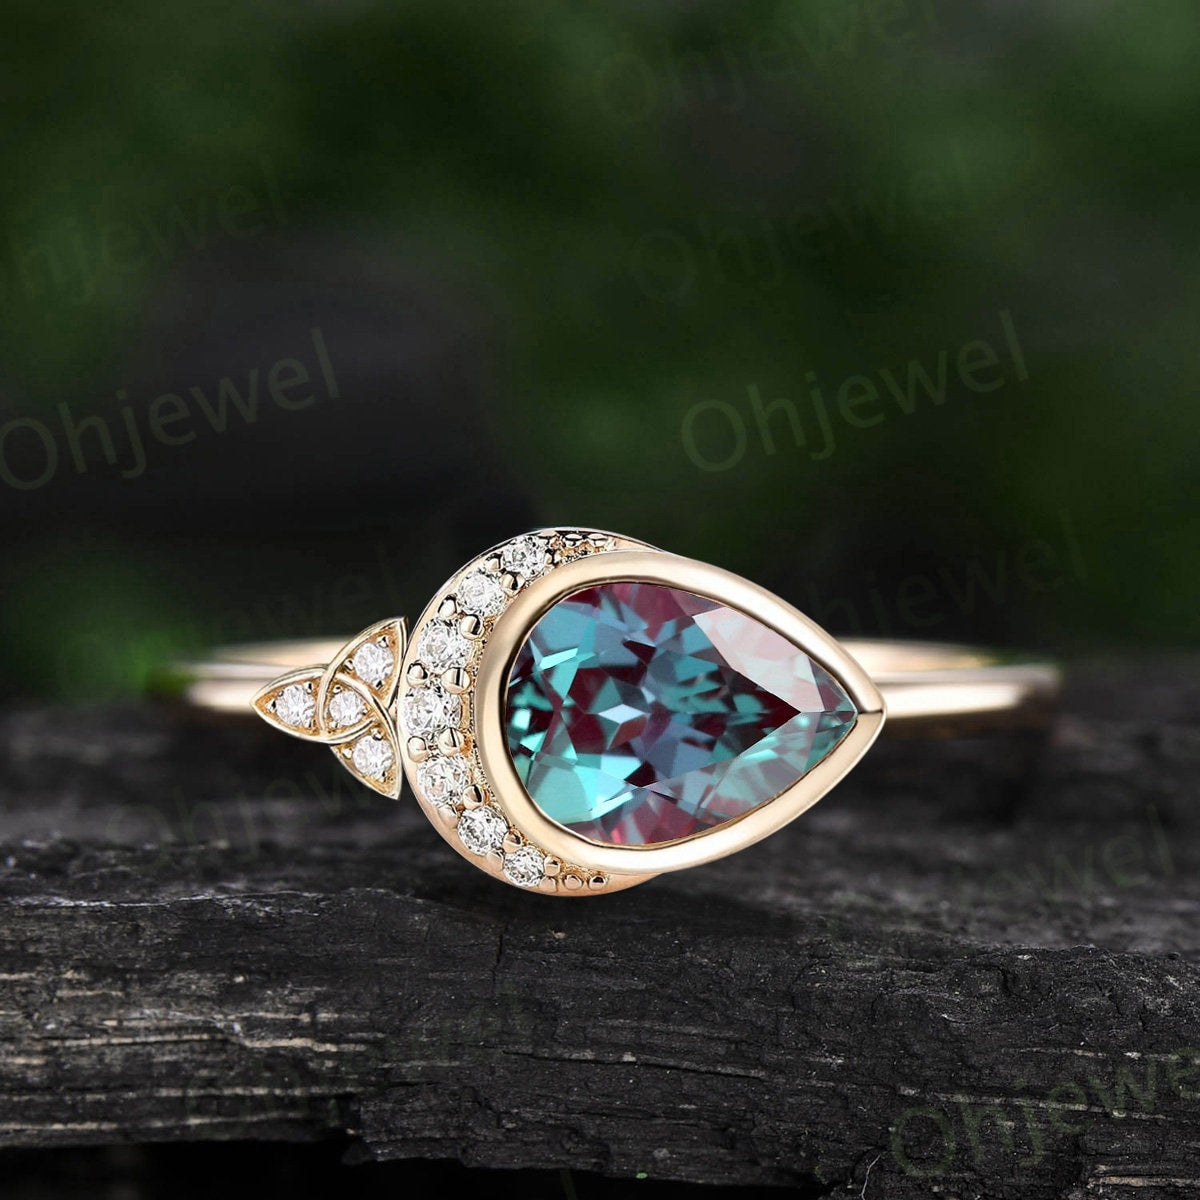 Pear shaped alexandrite ring vintage moon bezel unique engagement ring women solid 14k yellow gold celtic knot diamond anniversary ring gift